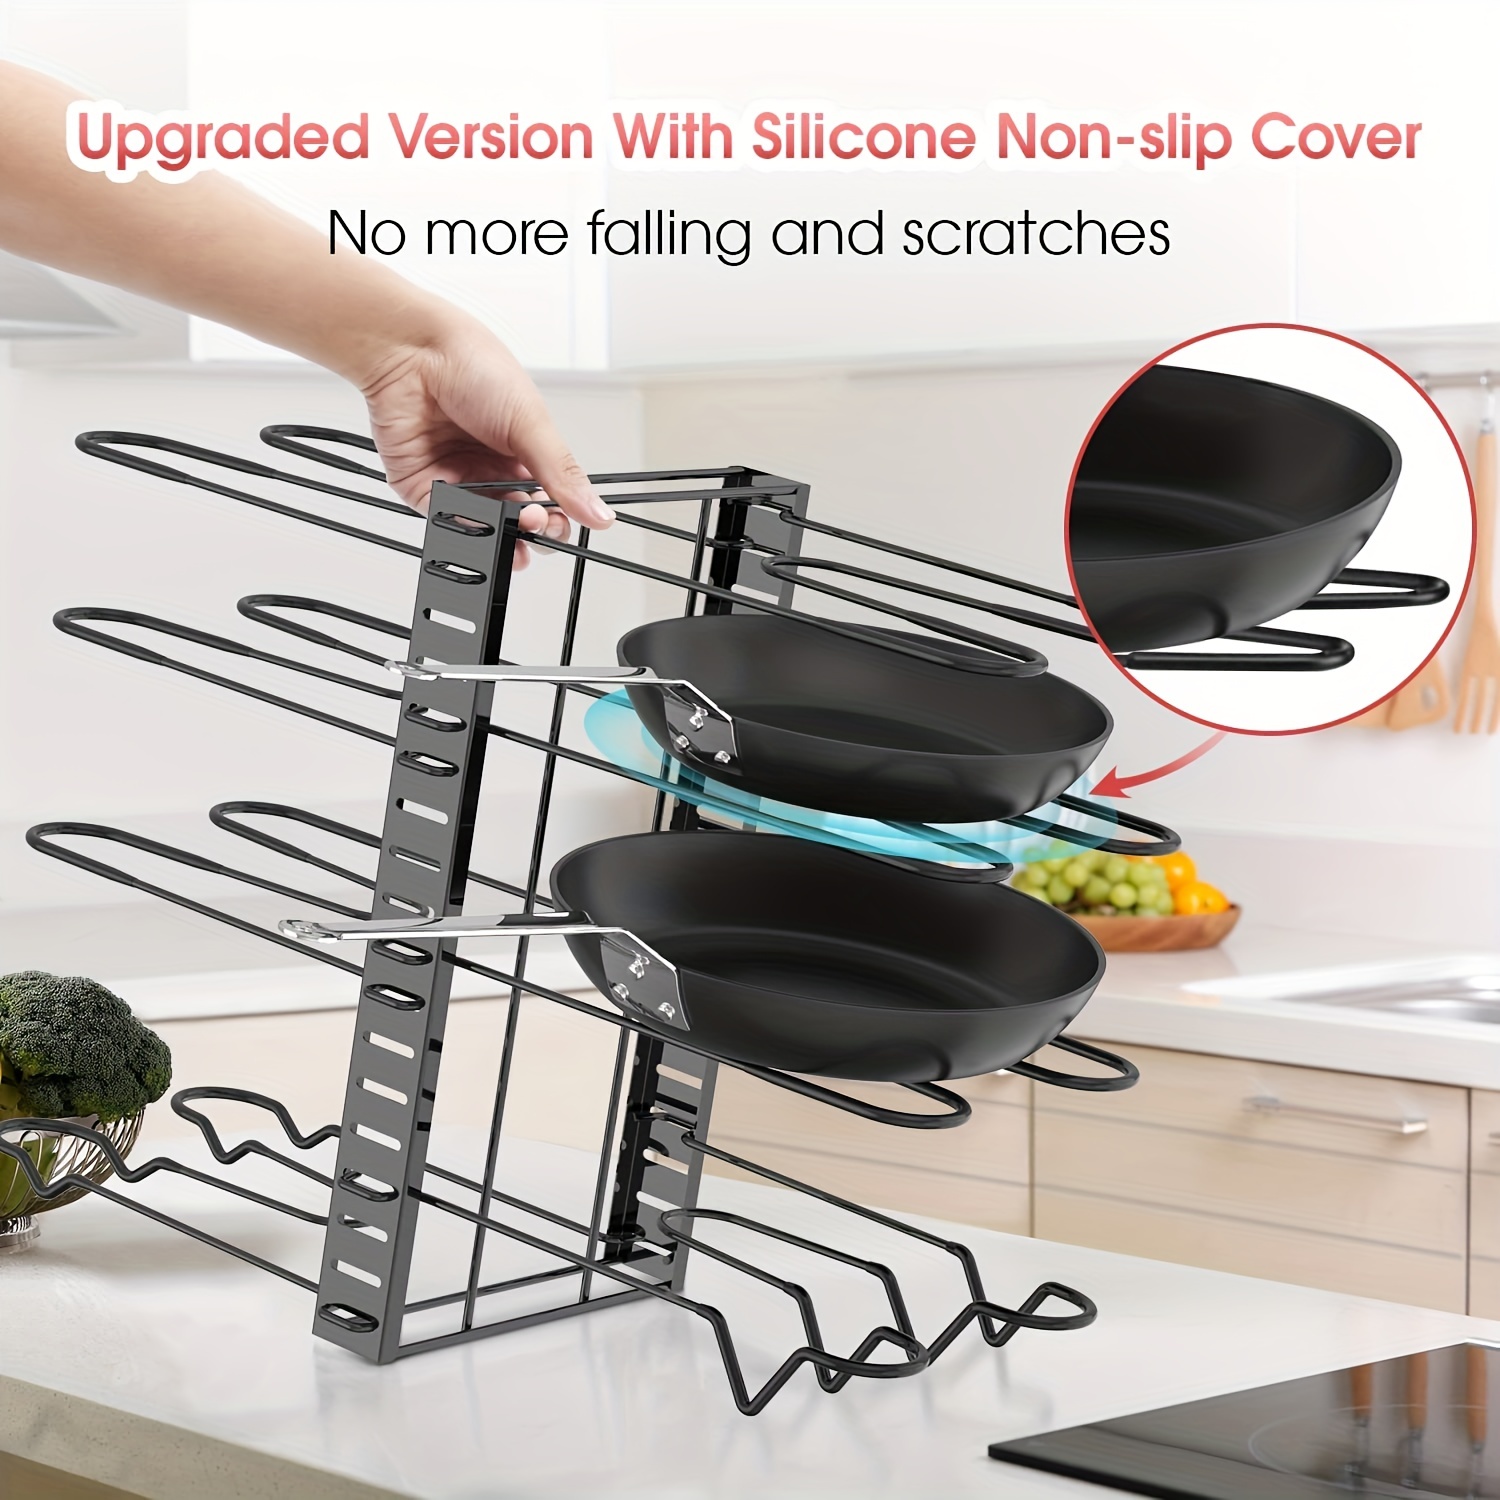 Pan Organizer Rack for Cabinet , Pot Rack with 3 DIY Methods , Adjustable Pots and Pans Organizer Under Cabinet with 8 Tiers